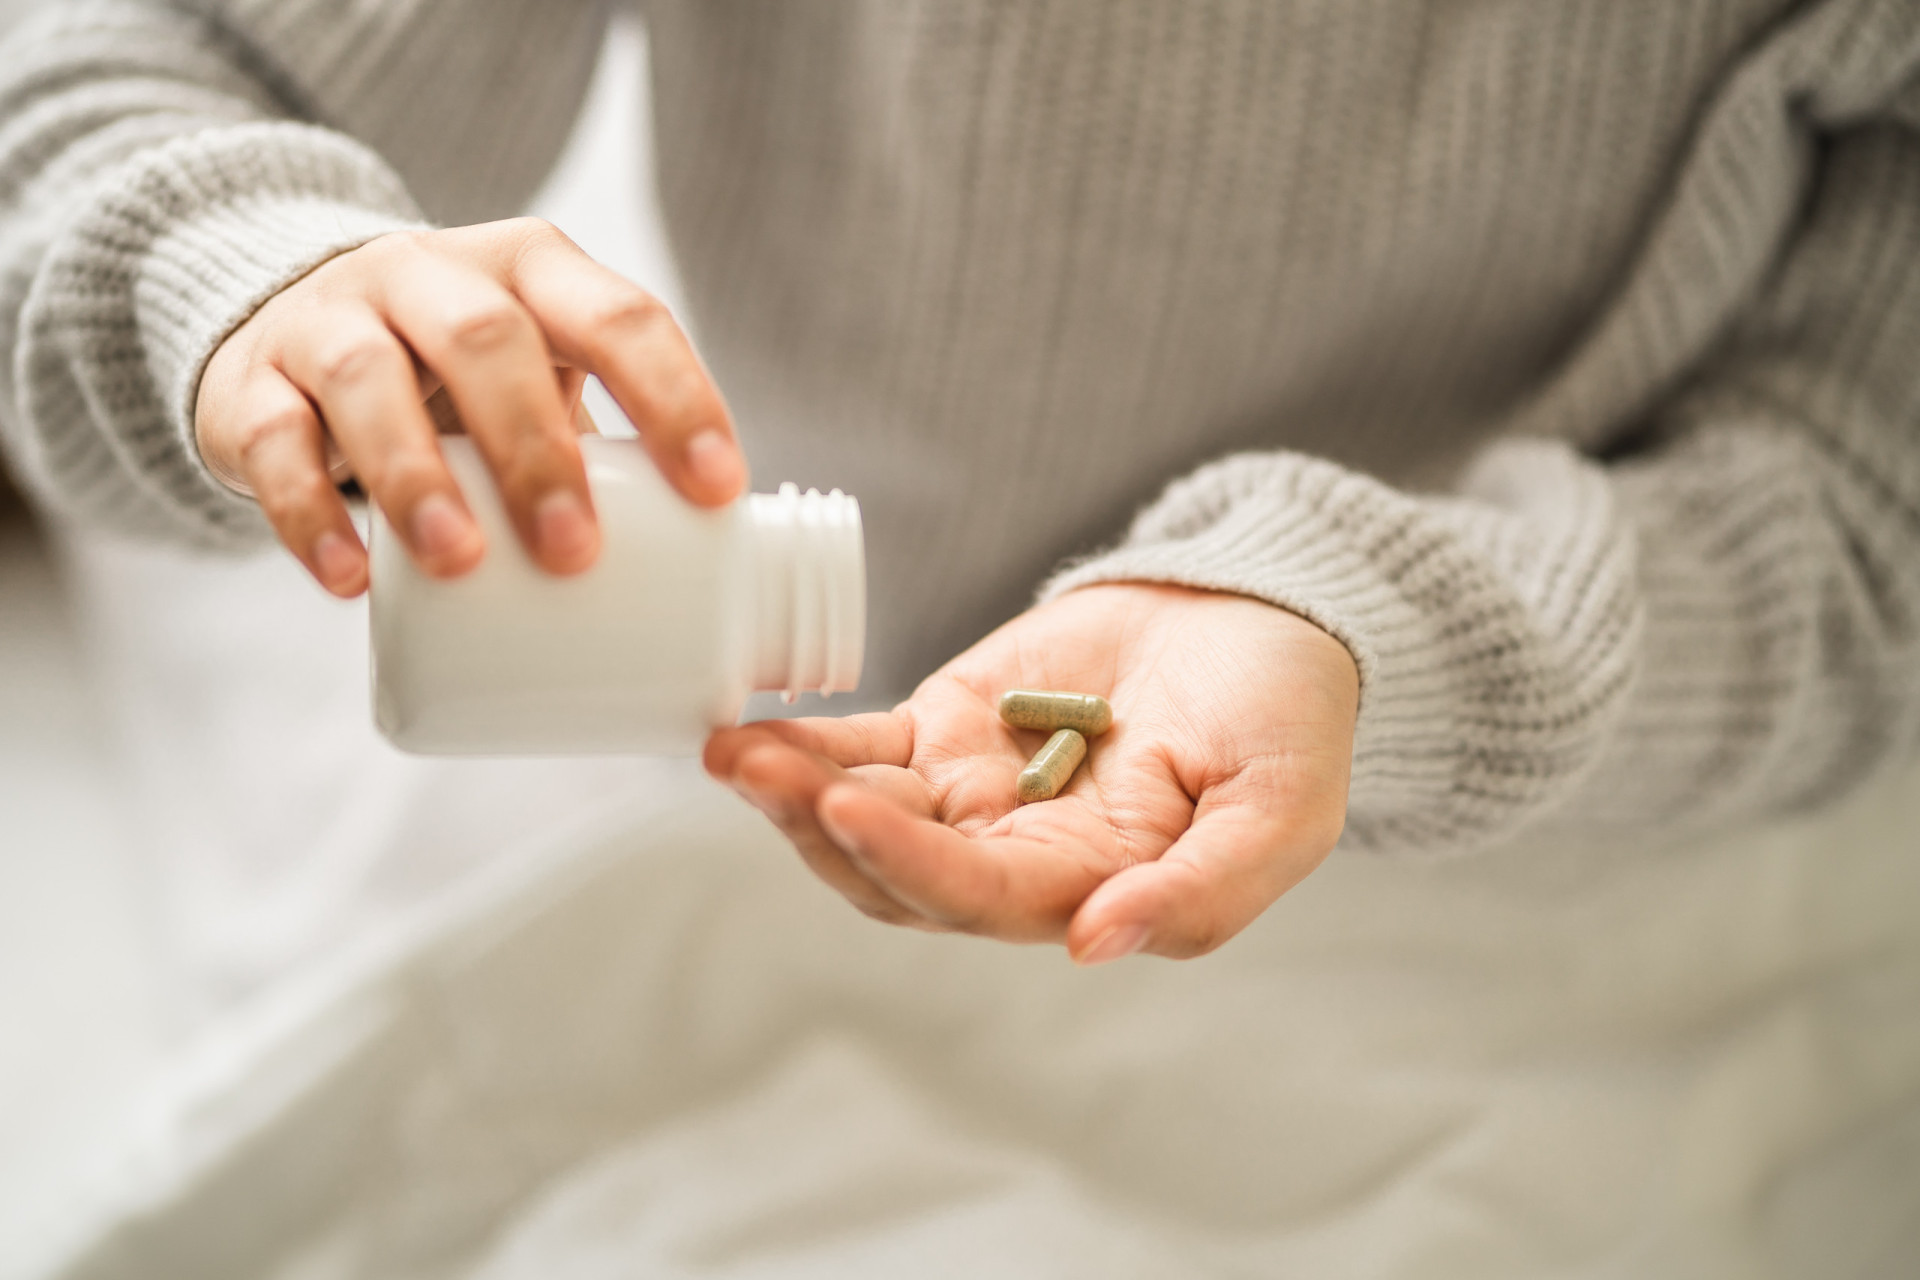 <p>If you're not able to get enough sunlight, eat a balanced diet, or exercise regularly, taking a supplement may help increase your serotonin levels.</p>